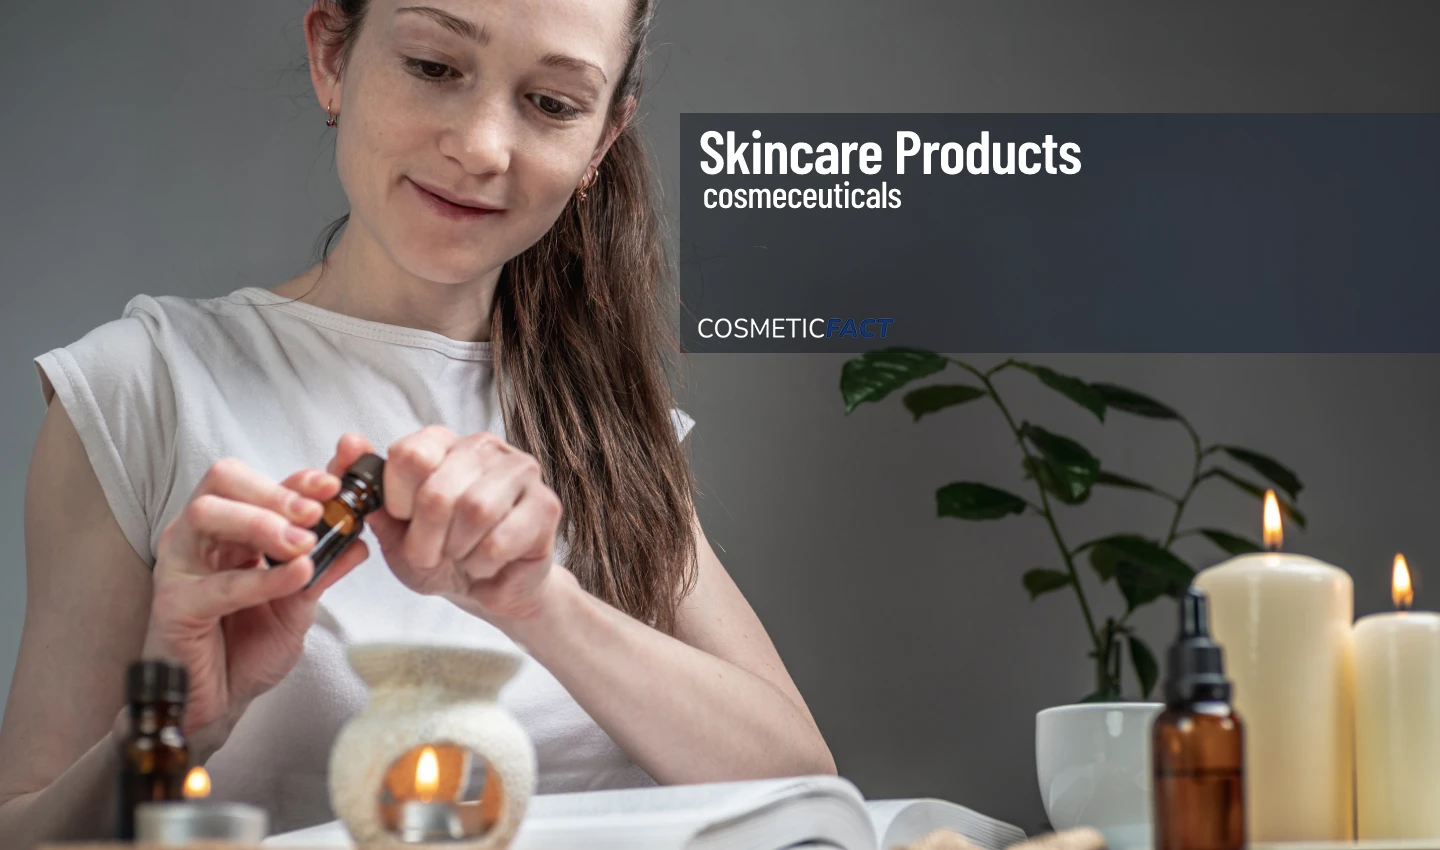 Woman holding skincare essences, the perfect addition to any skincare routine.